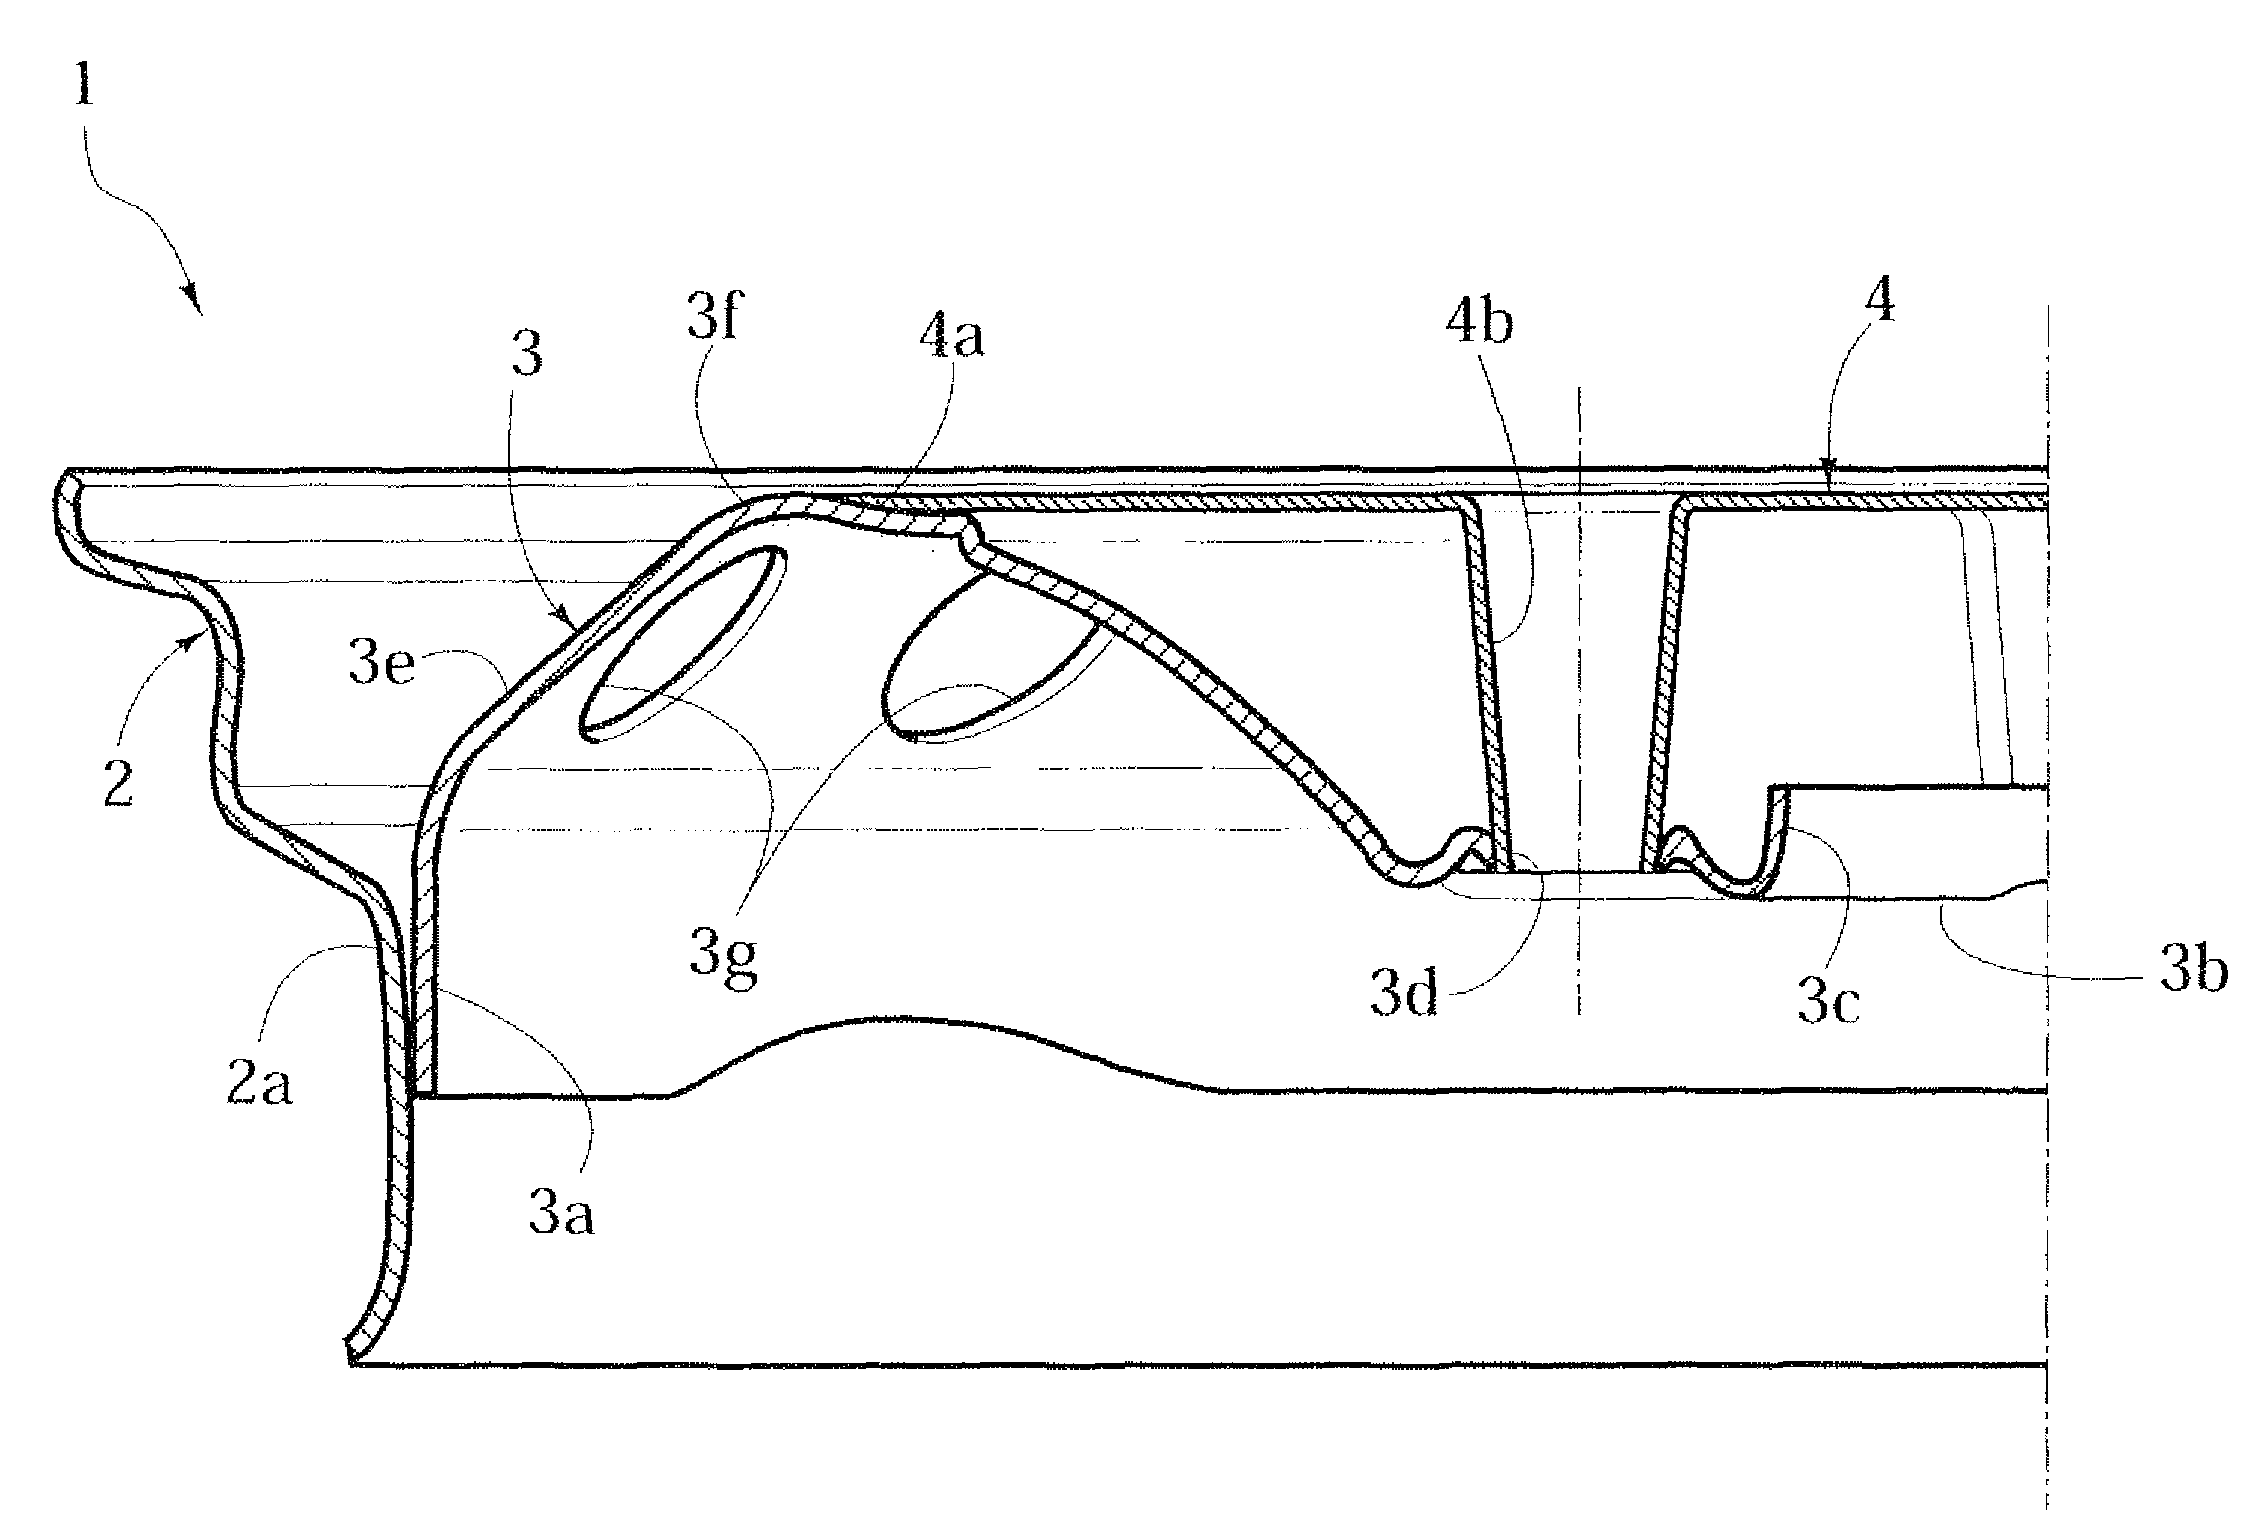 Motor-vehicle wheel structure having a main disk and an auxiliary disk